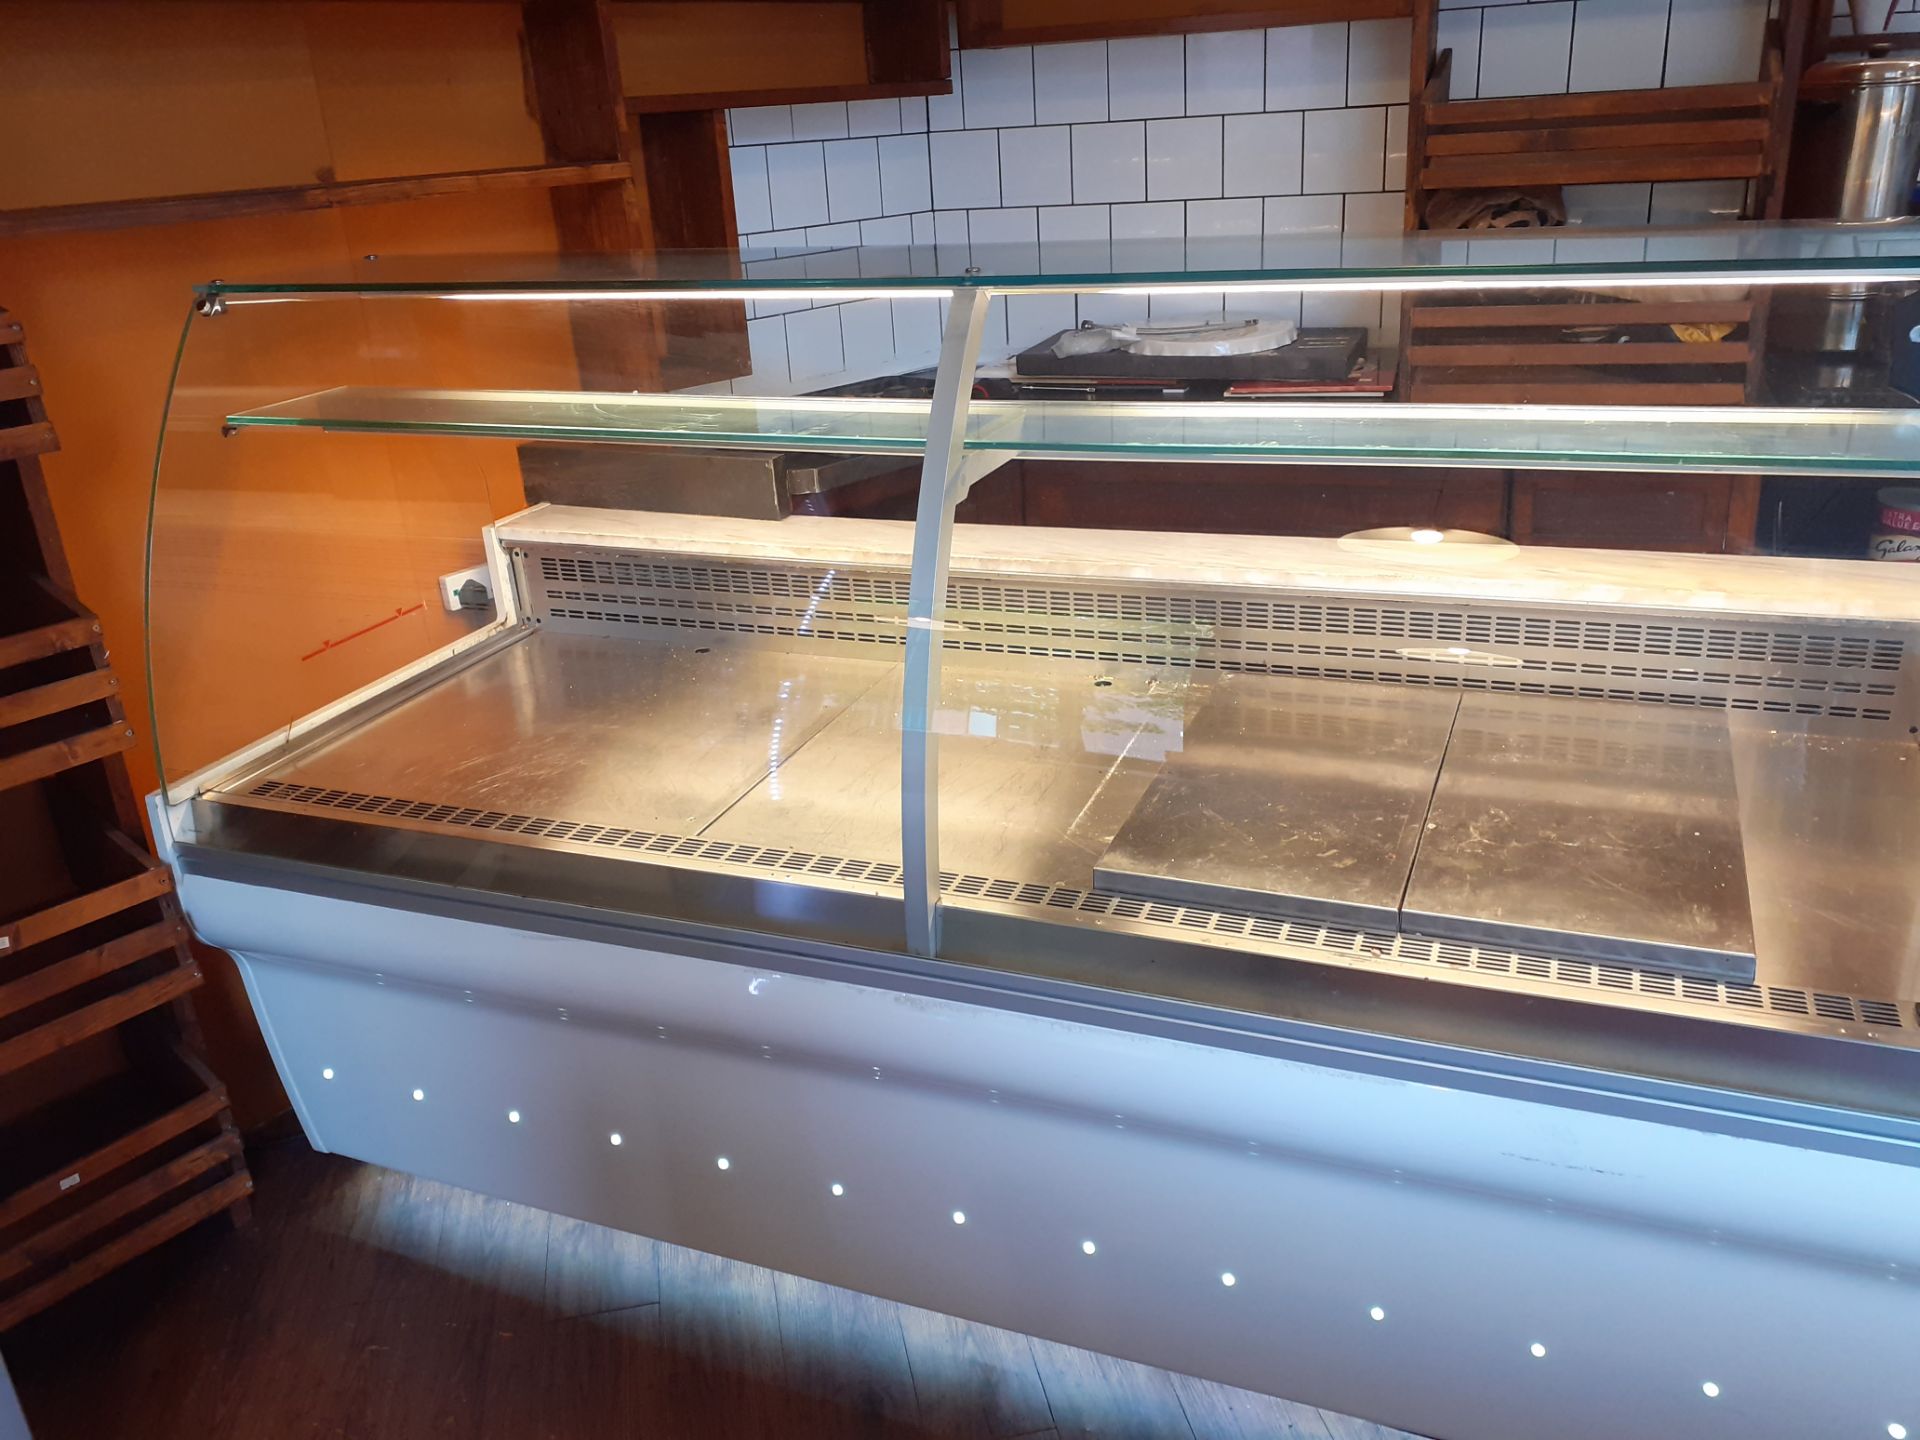 Jordao Vitel Vent Tot CG FI VCV IPS 2050 Epoxy Refrigerated Serve Over Counter Serial Number 14. - Image 2 of 7